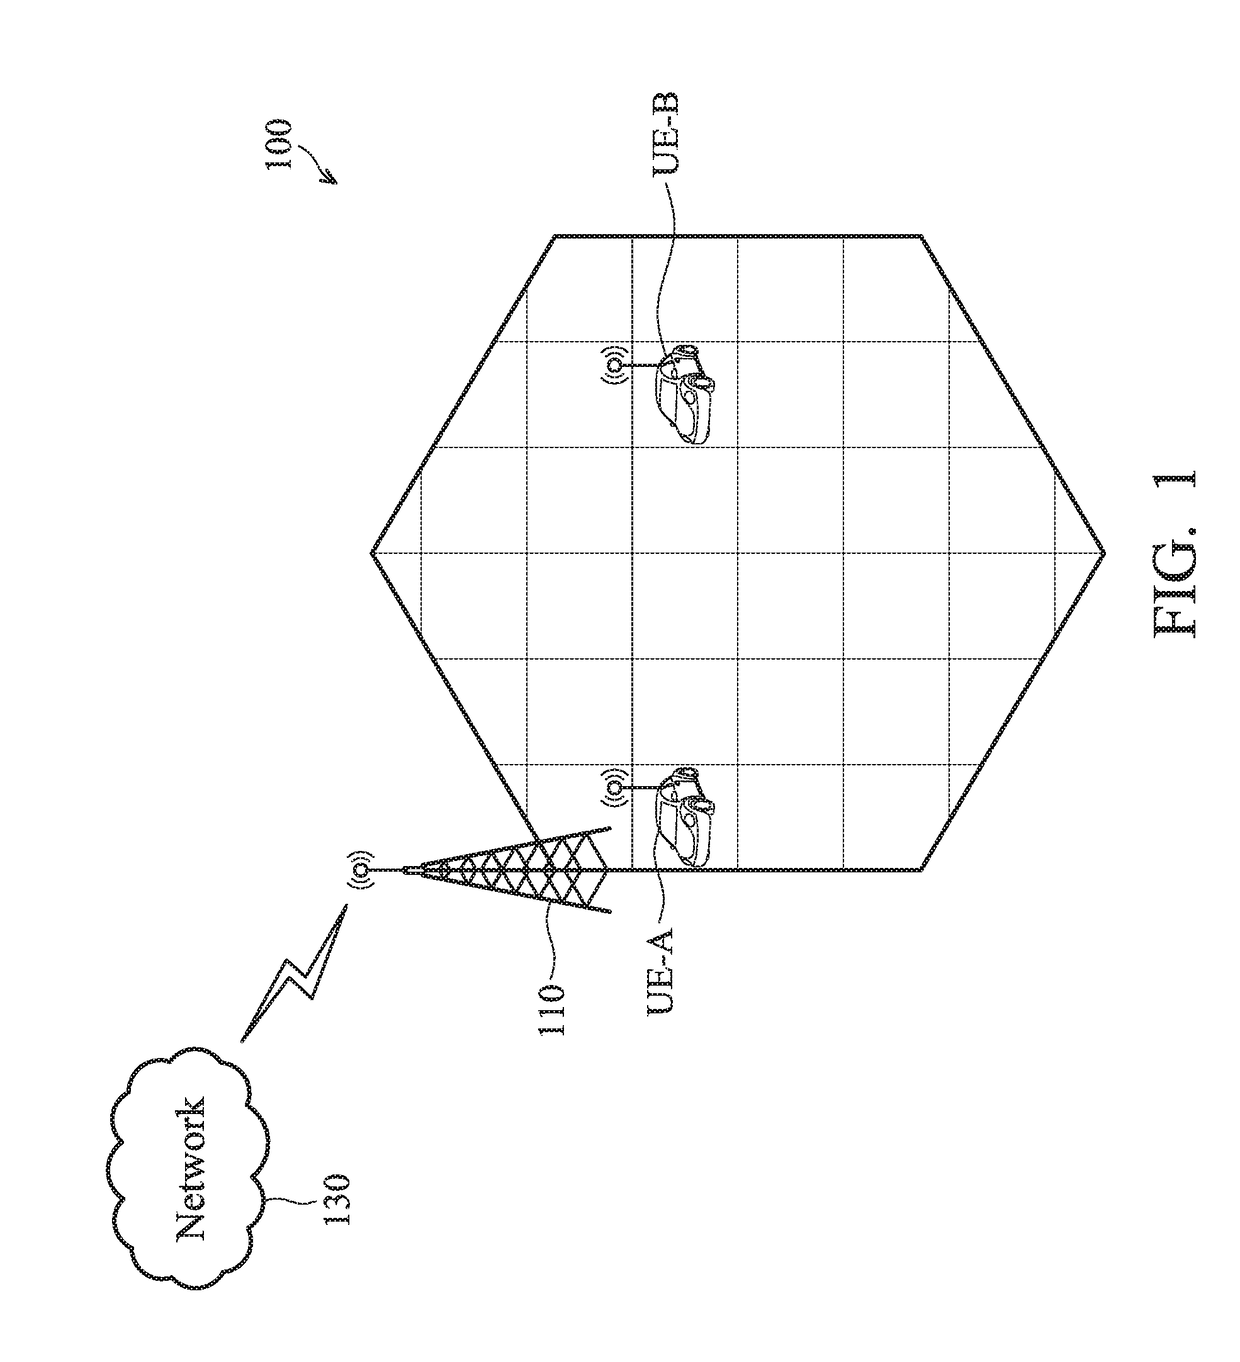 Method and communications device for dynamically allocating resources